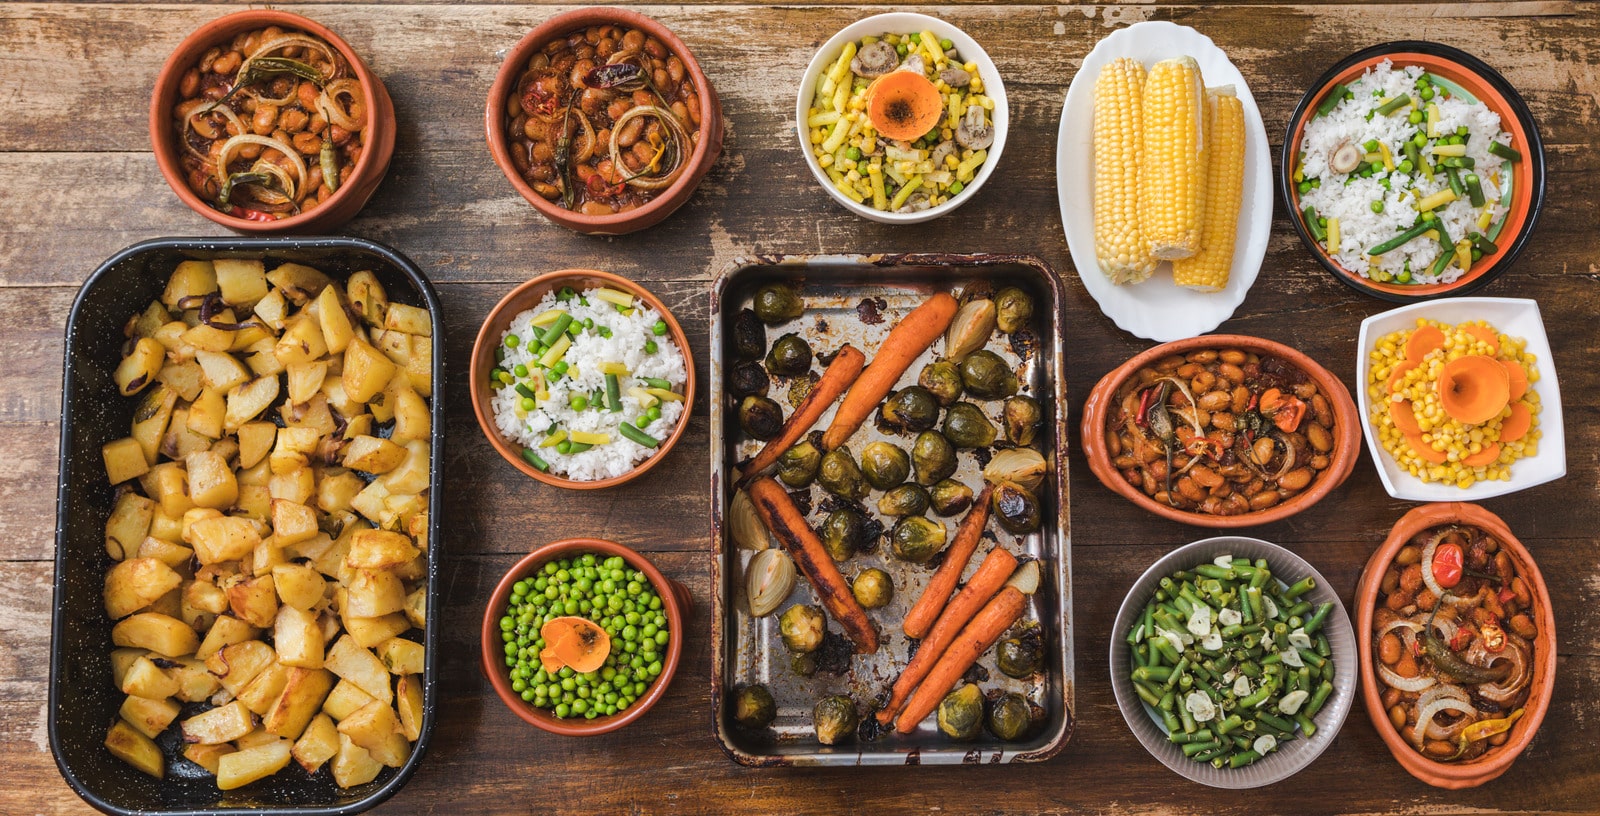 A variety of breakfast casserole side dishes displayed on a wooden table, including roasted potatoes, steamed vegetables, baked beans in earthenware bowls, roasted carrots with brussels sprouts, and bowls of white rice with green peas.